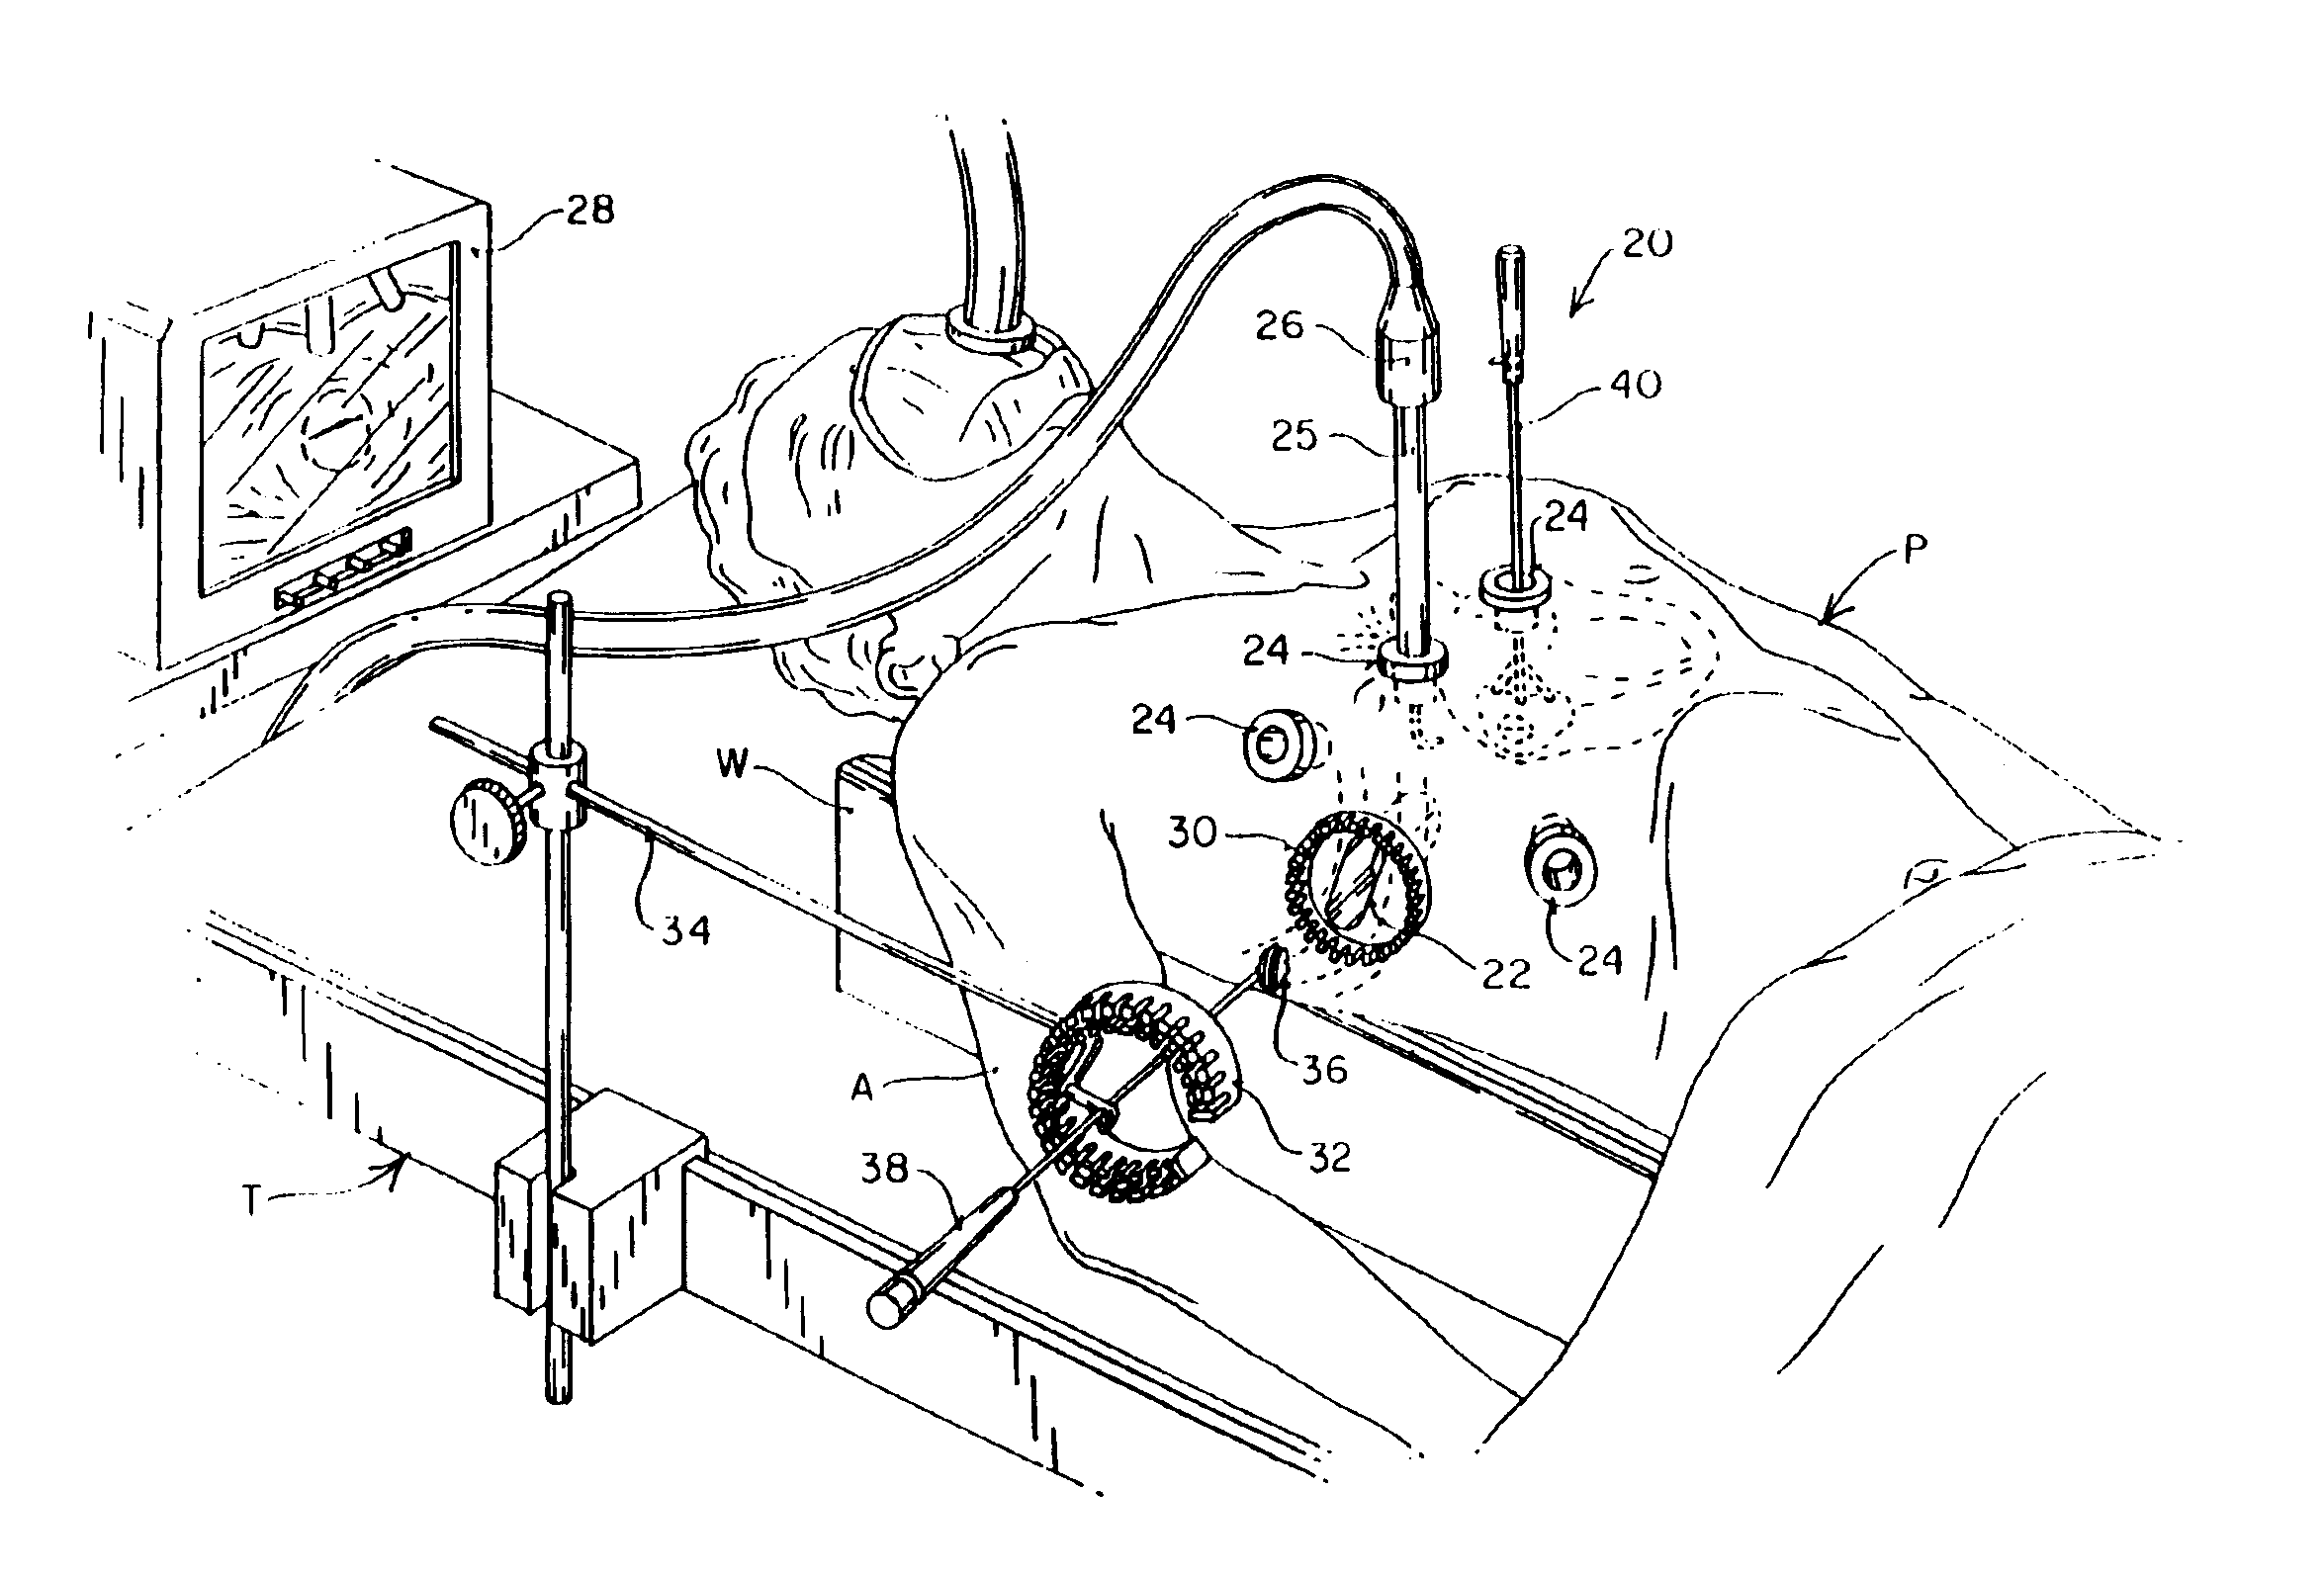 Devices and methods for intracardiac procedures